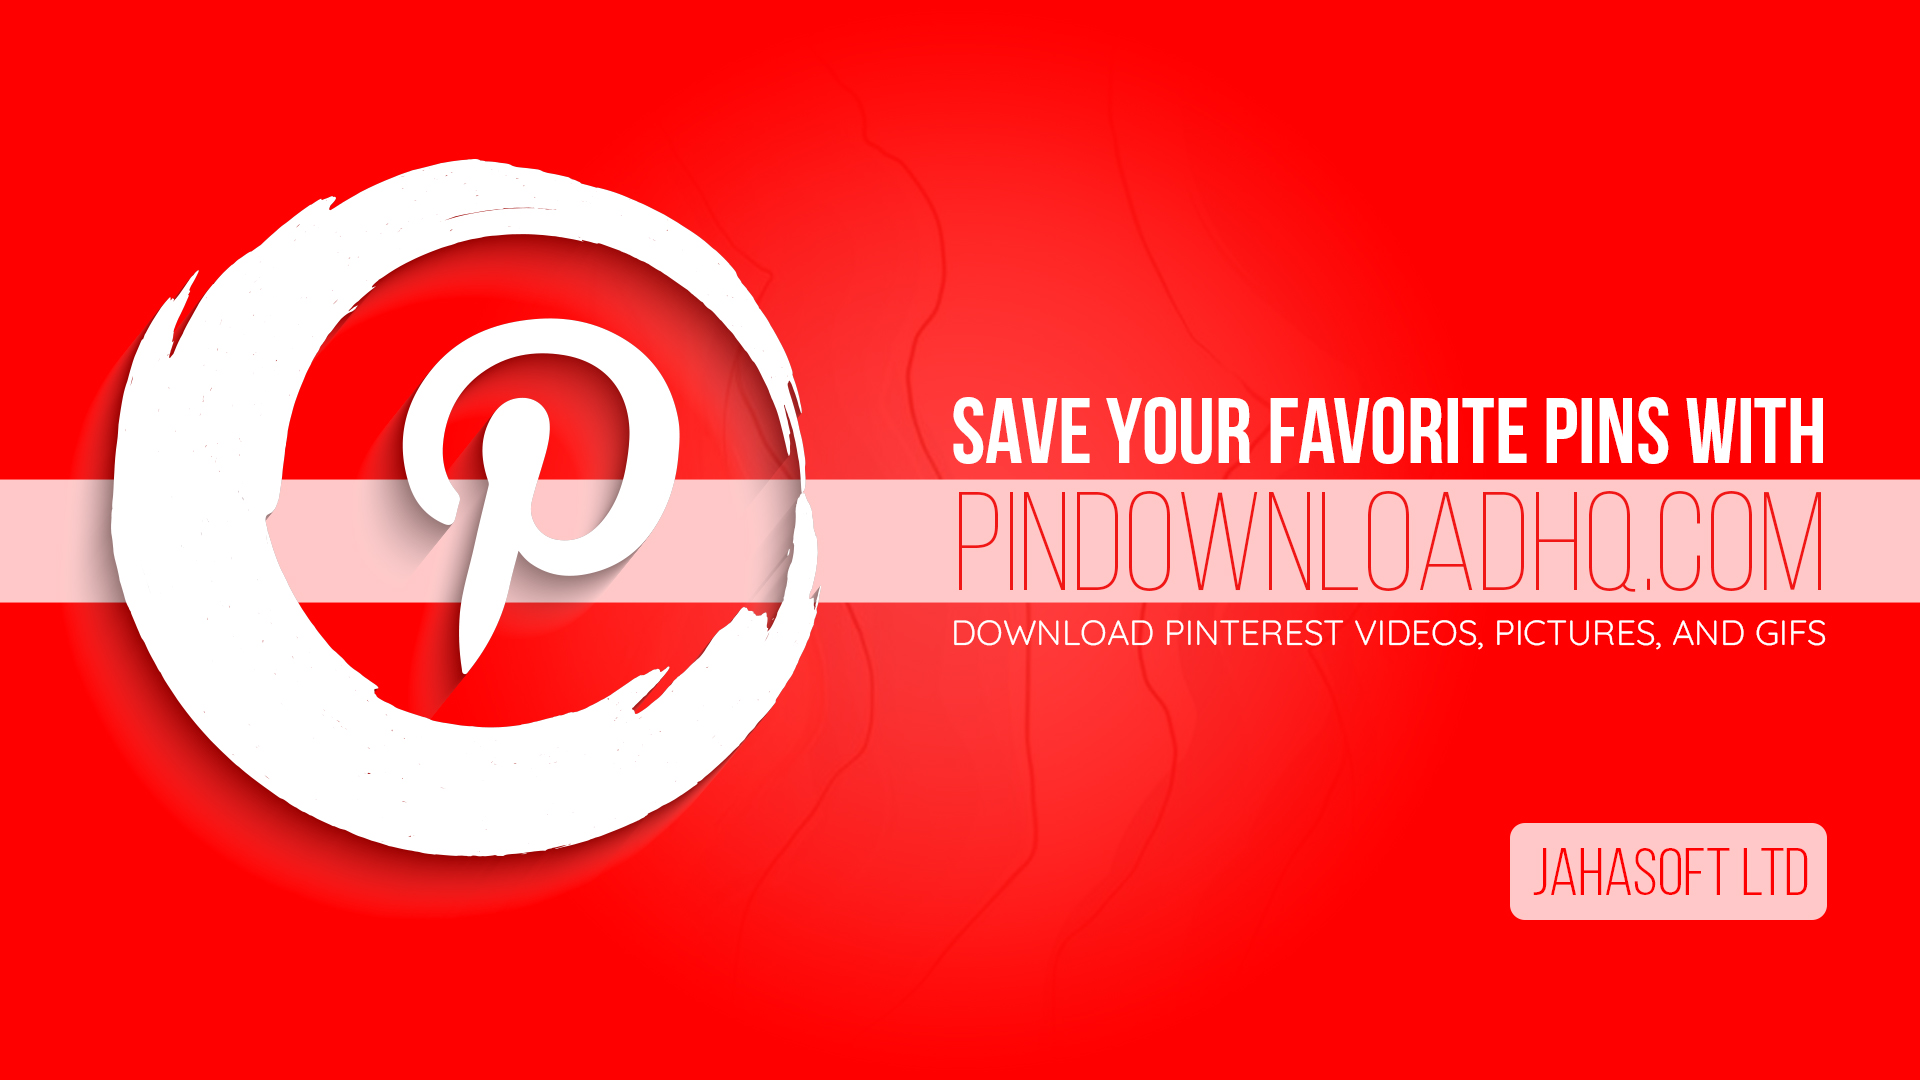 Download Pinterest Videos, Pictures, and GIFs - JAHASOFT